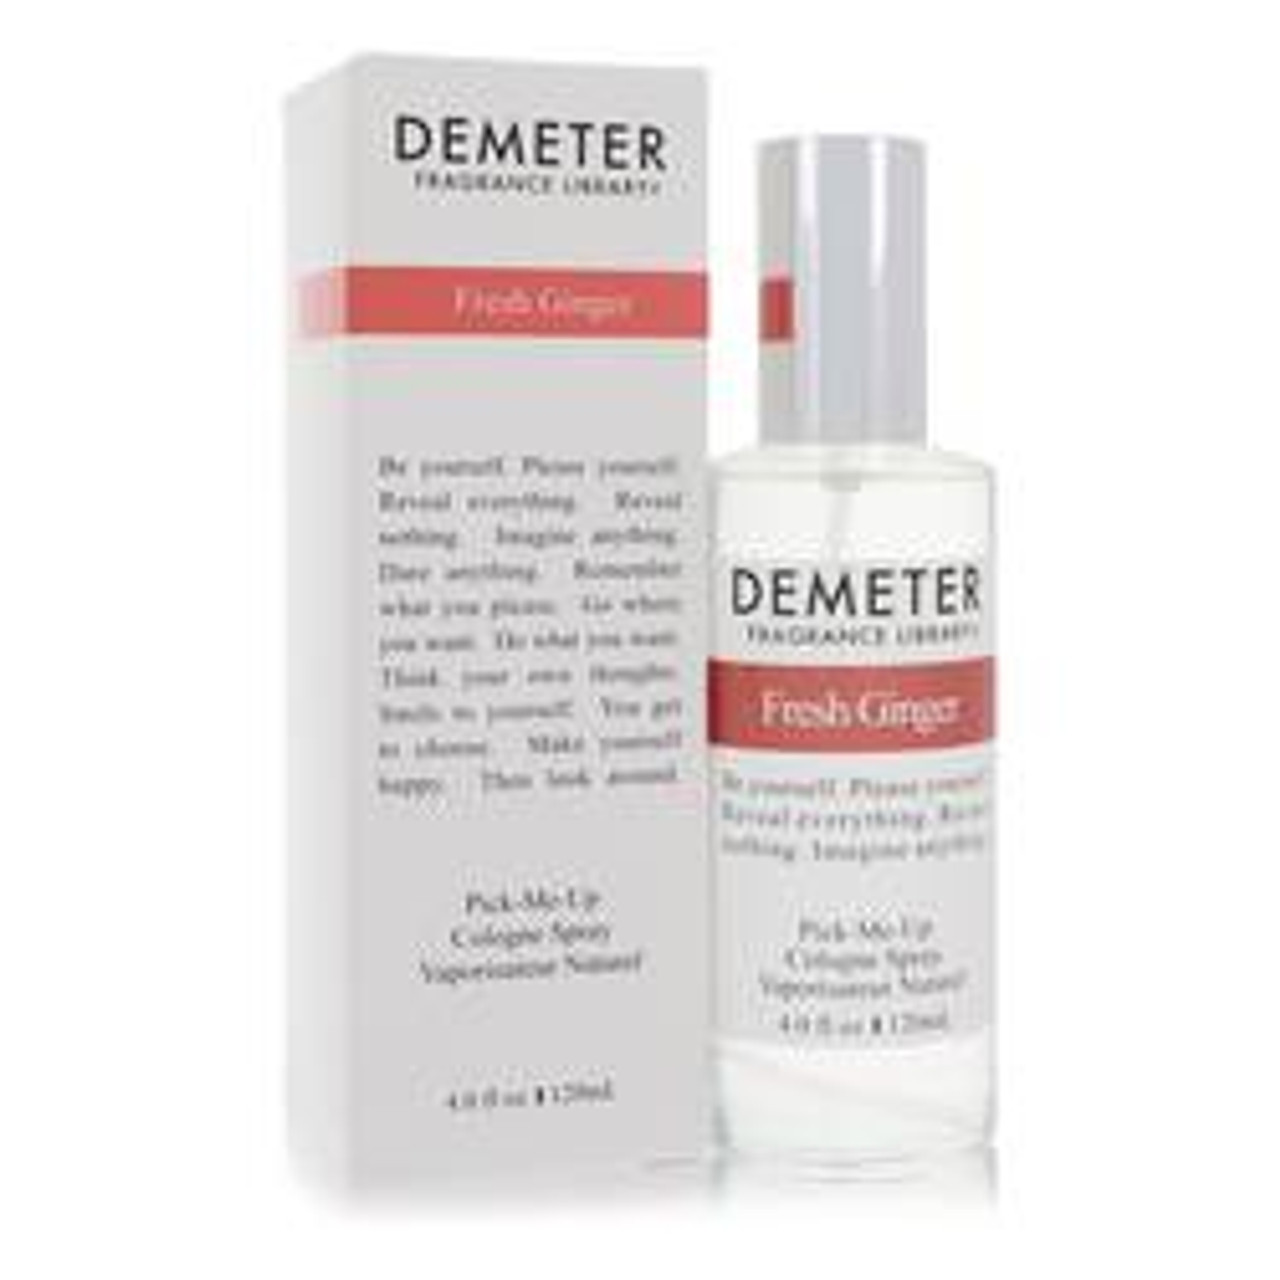 Demeter Fresh Ginger Perfume By Demeter Cologne Spray 4 oz for Women - [From 79.50 - Choose pk Qty ] - *Ships from Miami